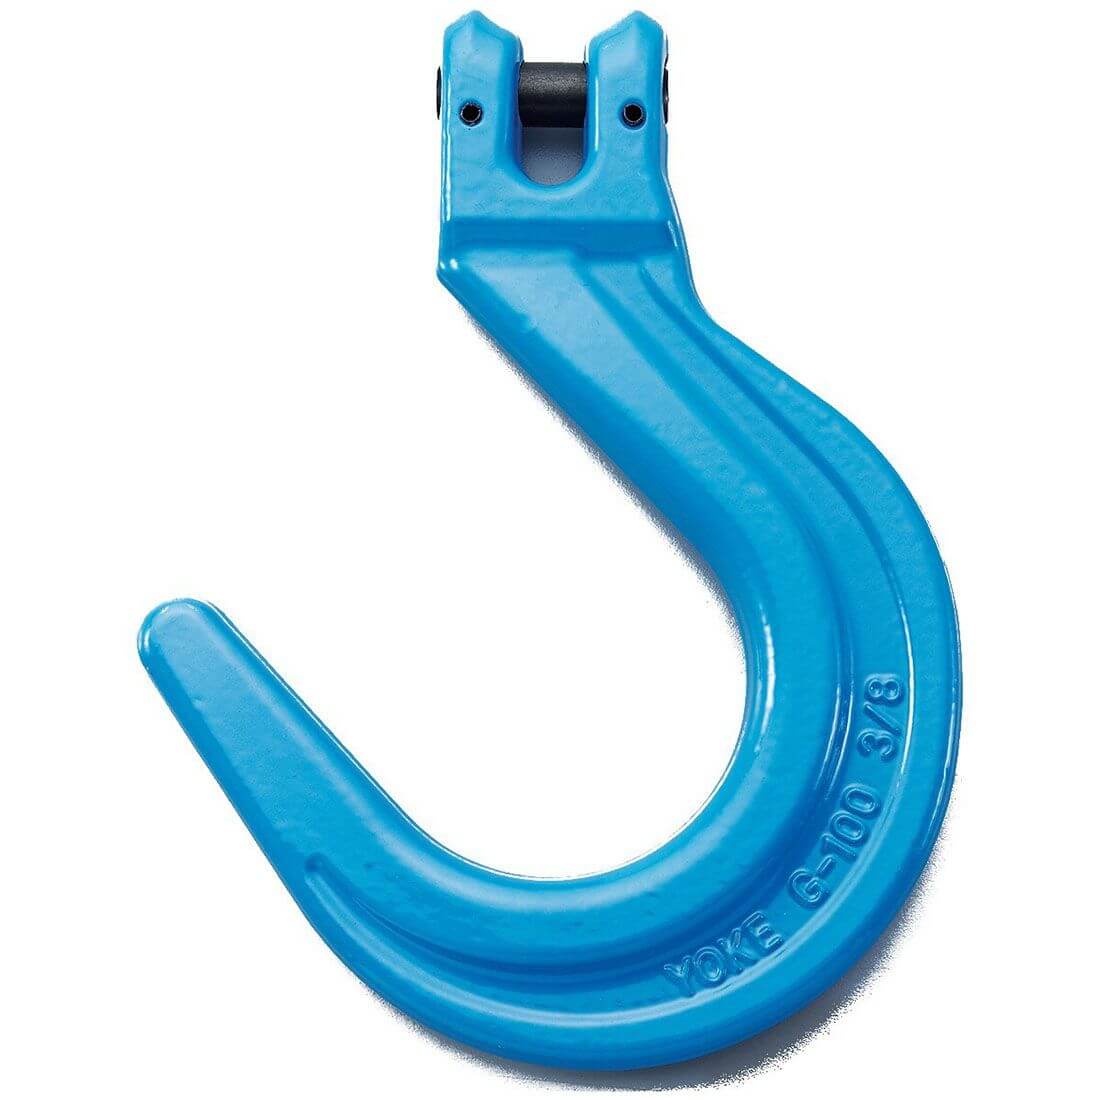 Yoke Grade 100 Clevis Foundry Hook designed for chain sling assemblies.  Blue color lifting Hook